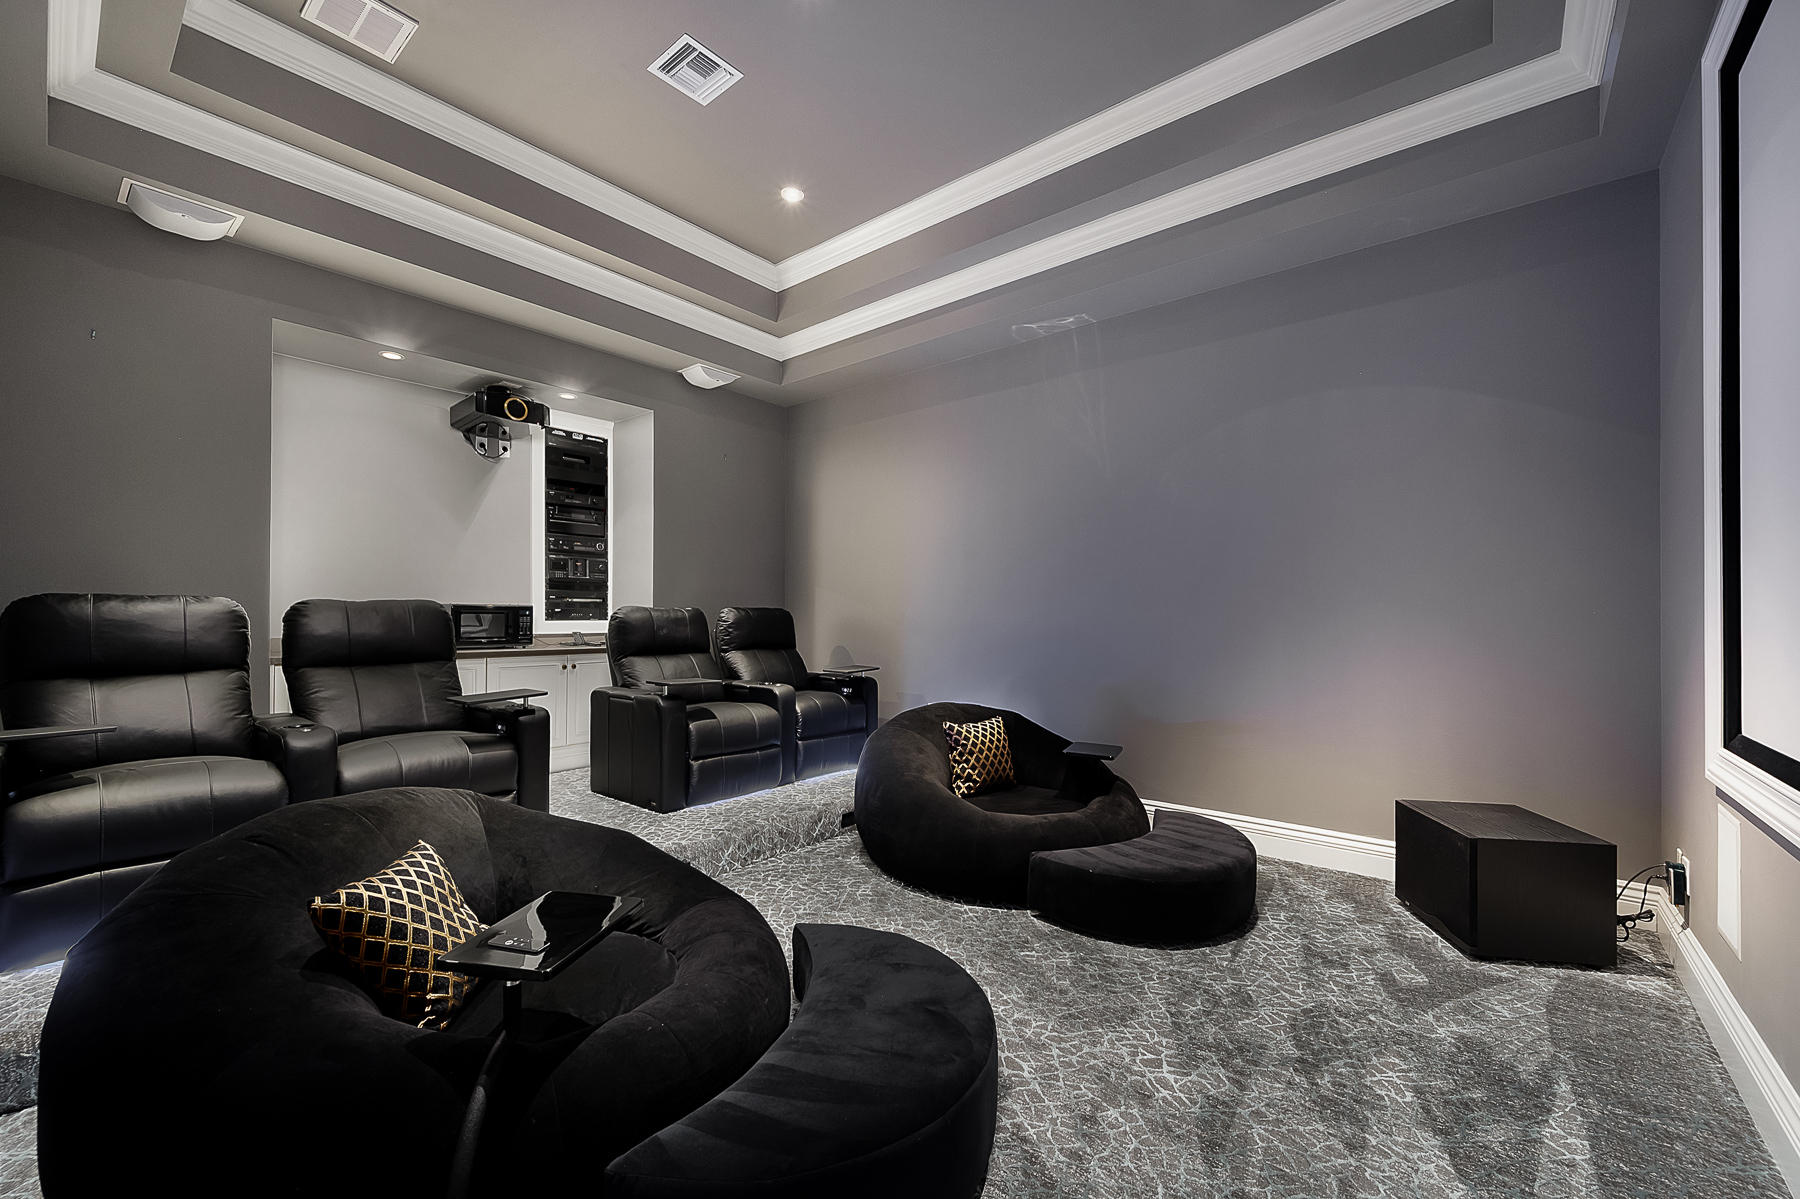 A unique feature of the house is the theatre which has motion seating, snack trays, USB ports, and under-mount lighting in the reclining chairs. Large floor chairs are a family favorite for watching movies and sporting events with surround sound.